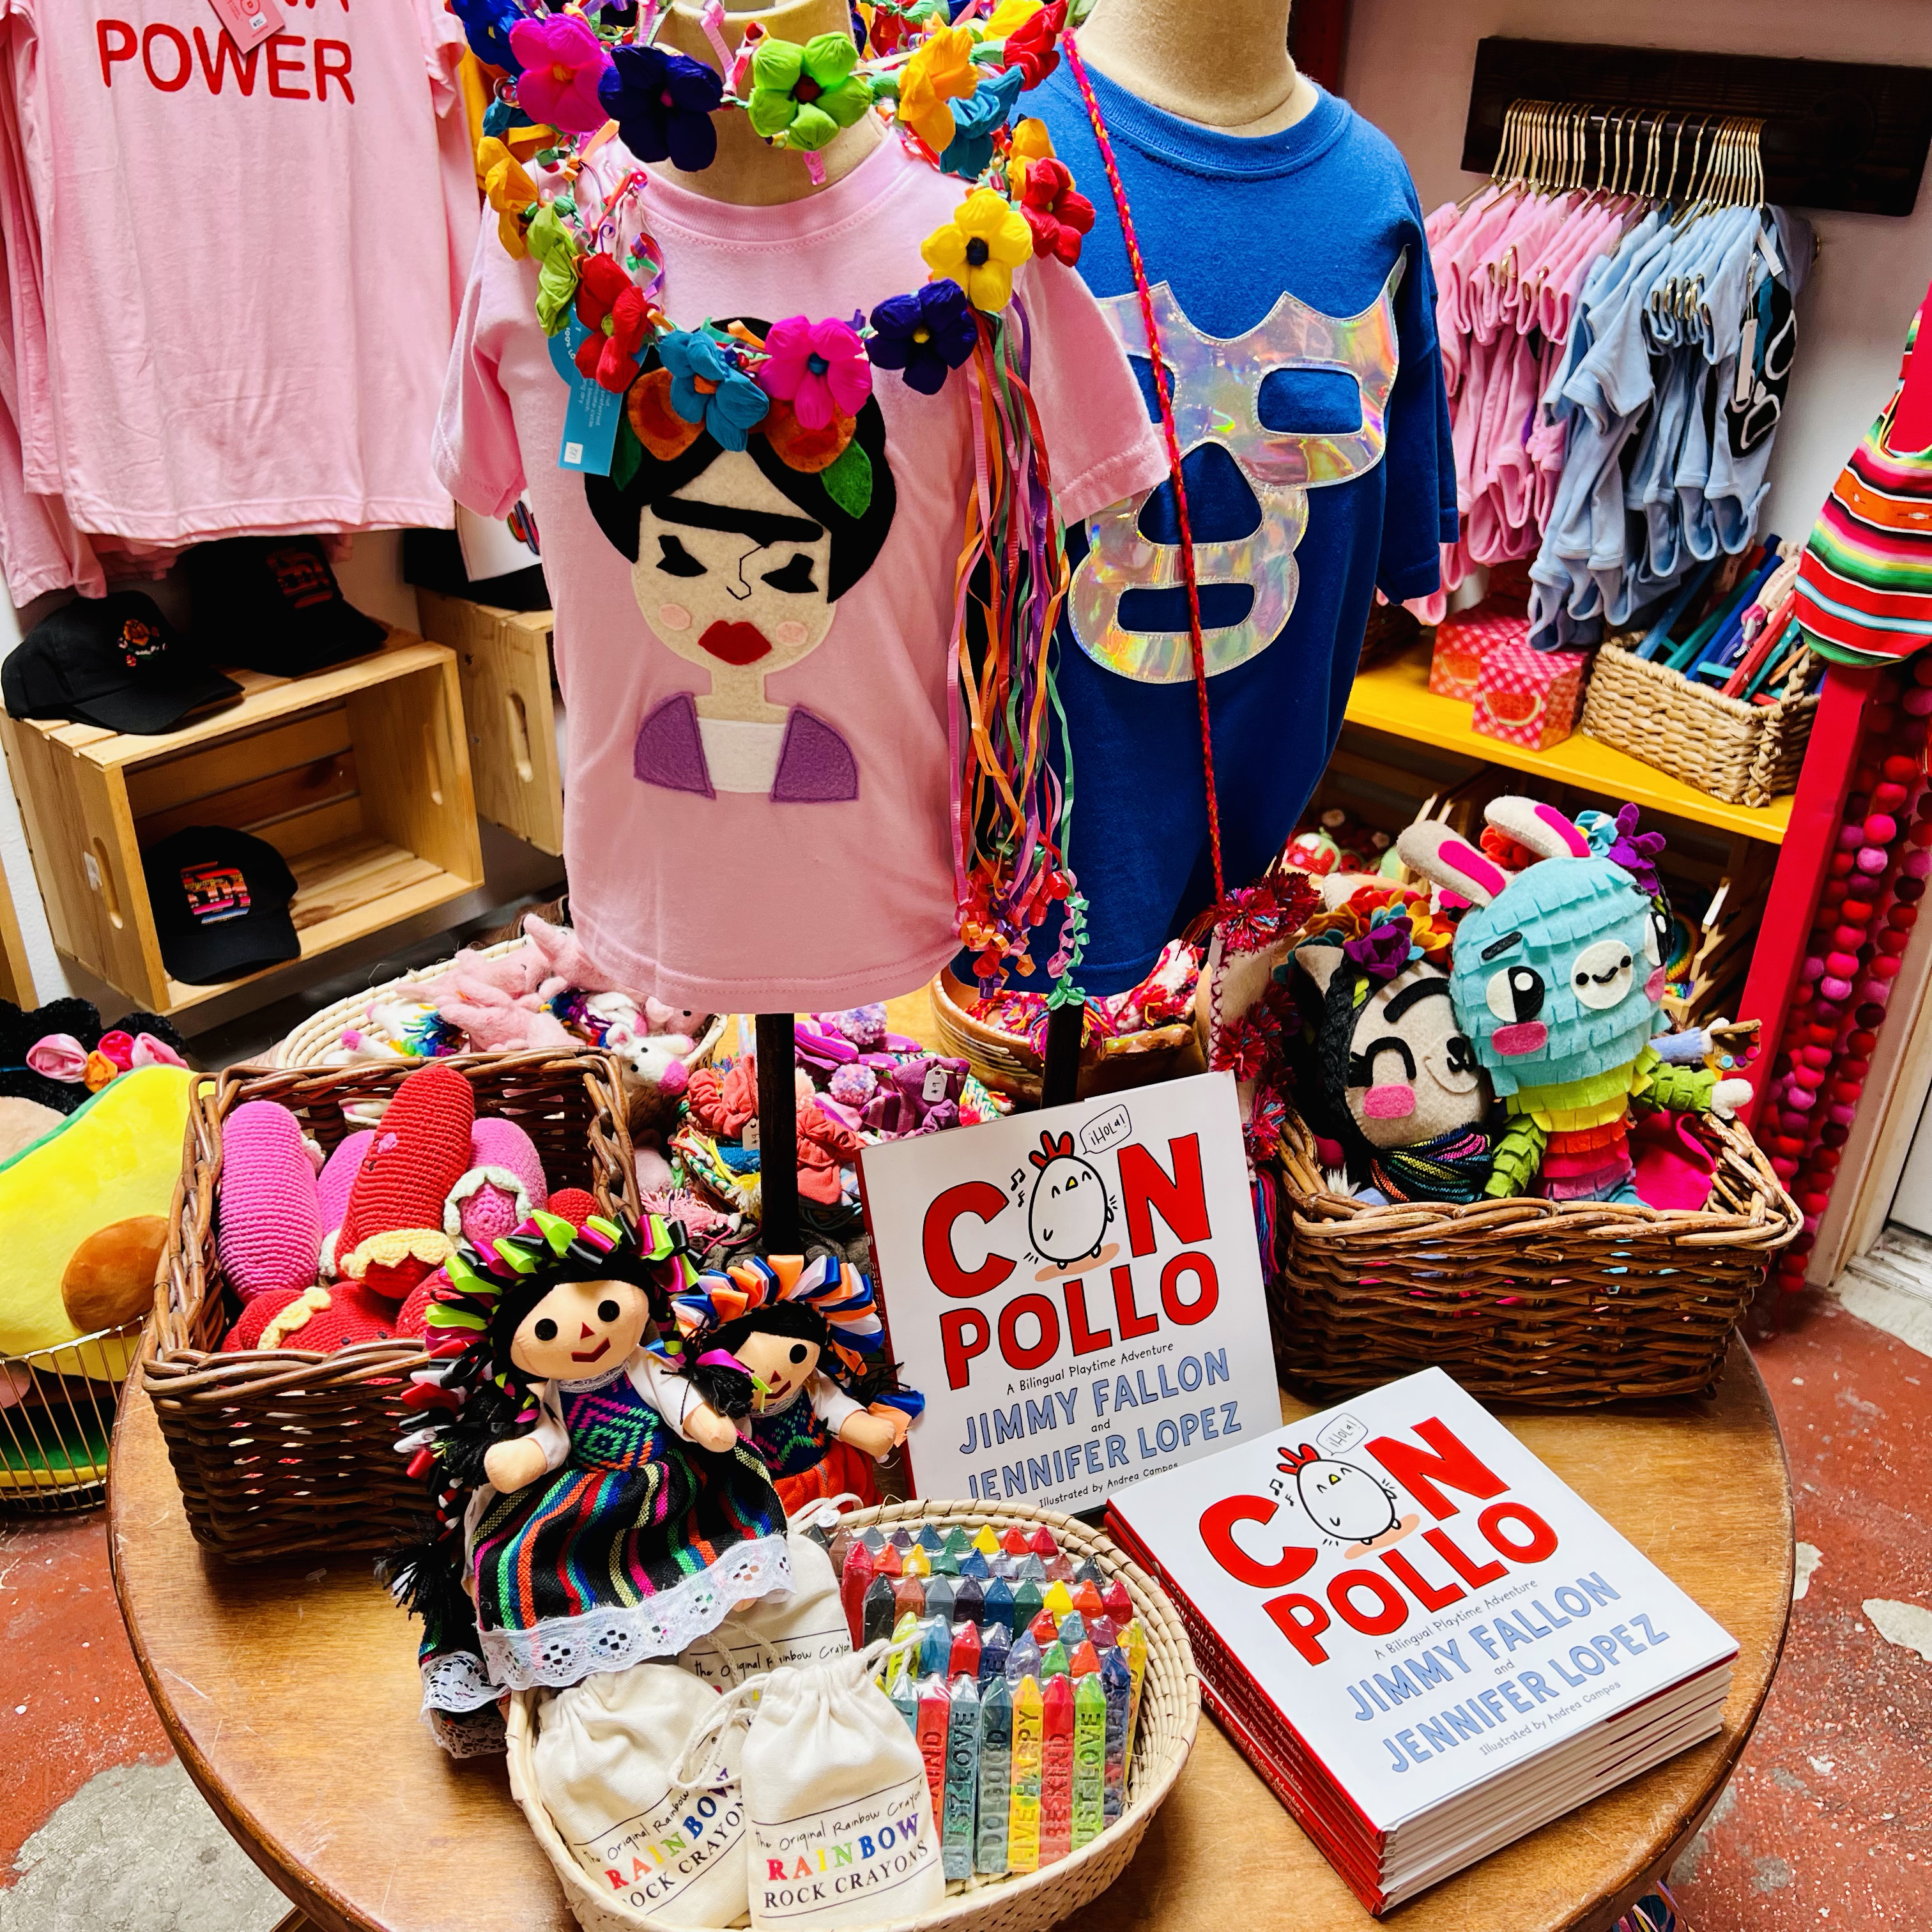 Shop Holiday: Gifts for kids 10 and under | Pittsburgh Post-Gazette